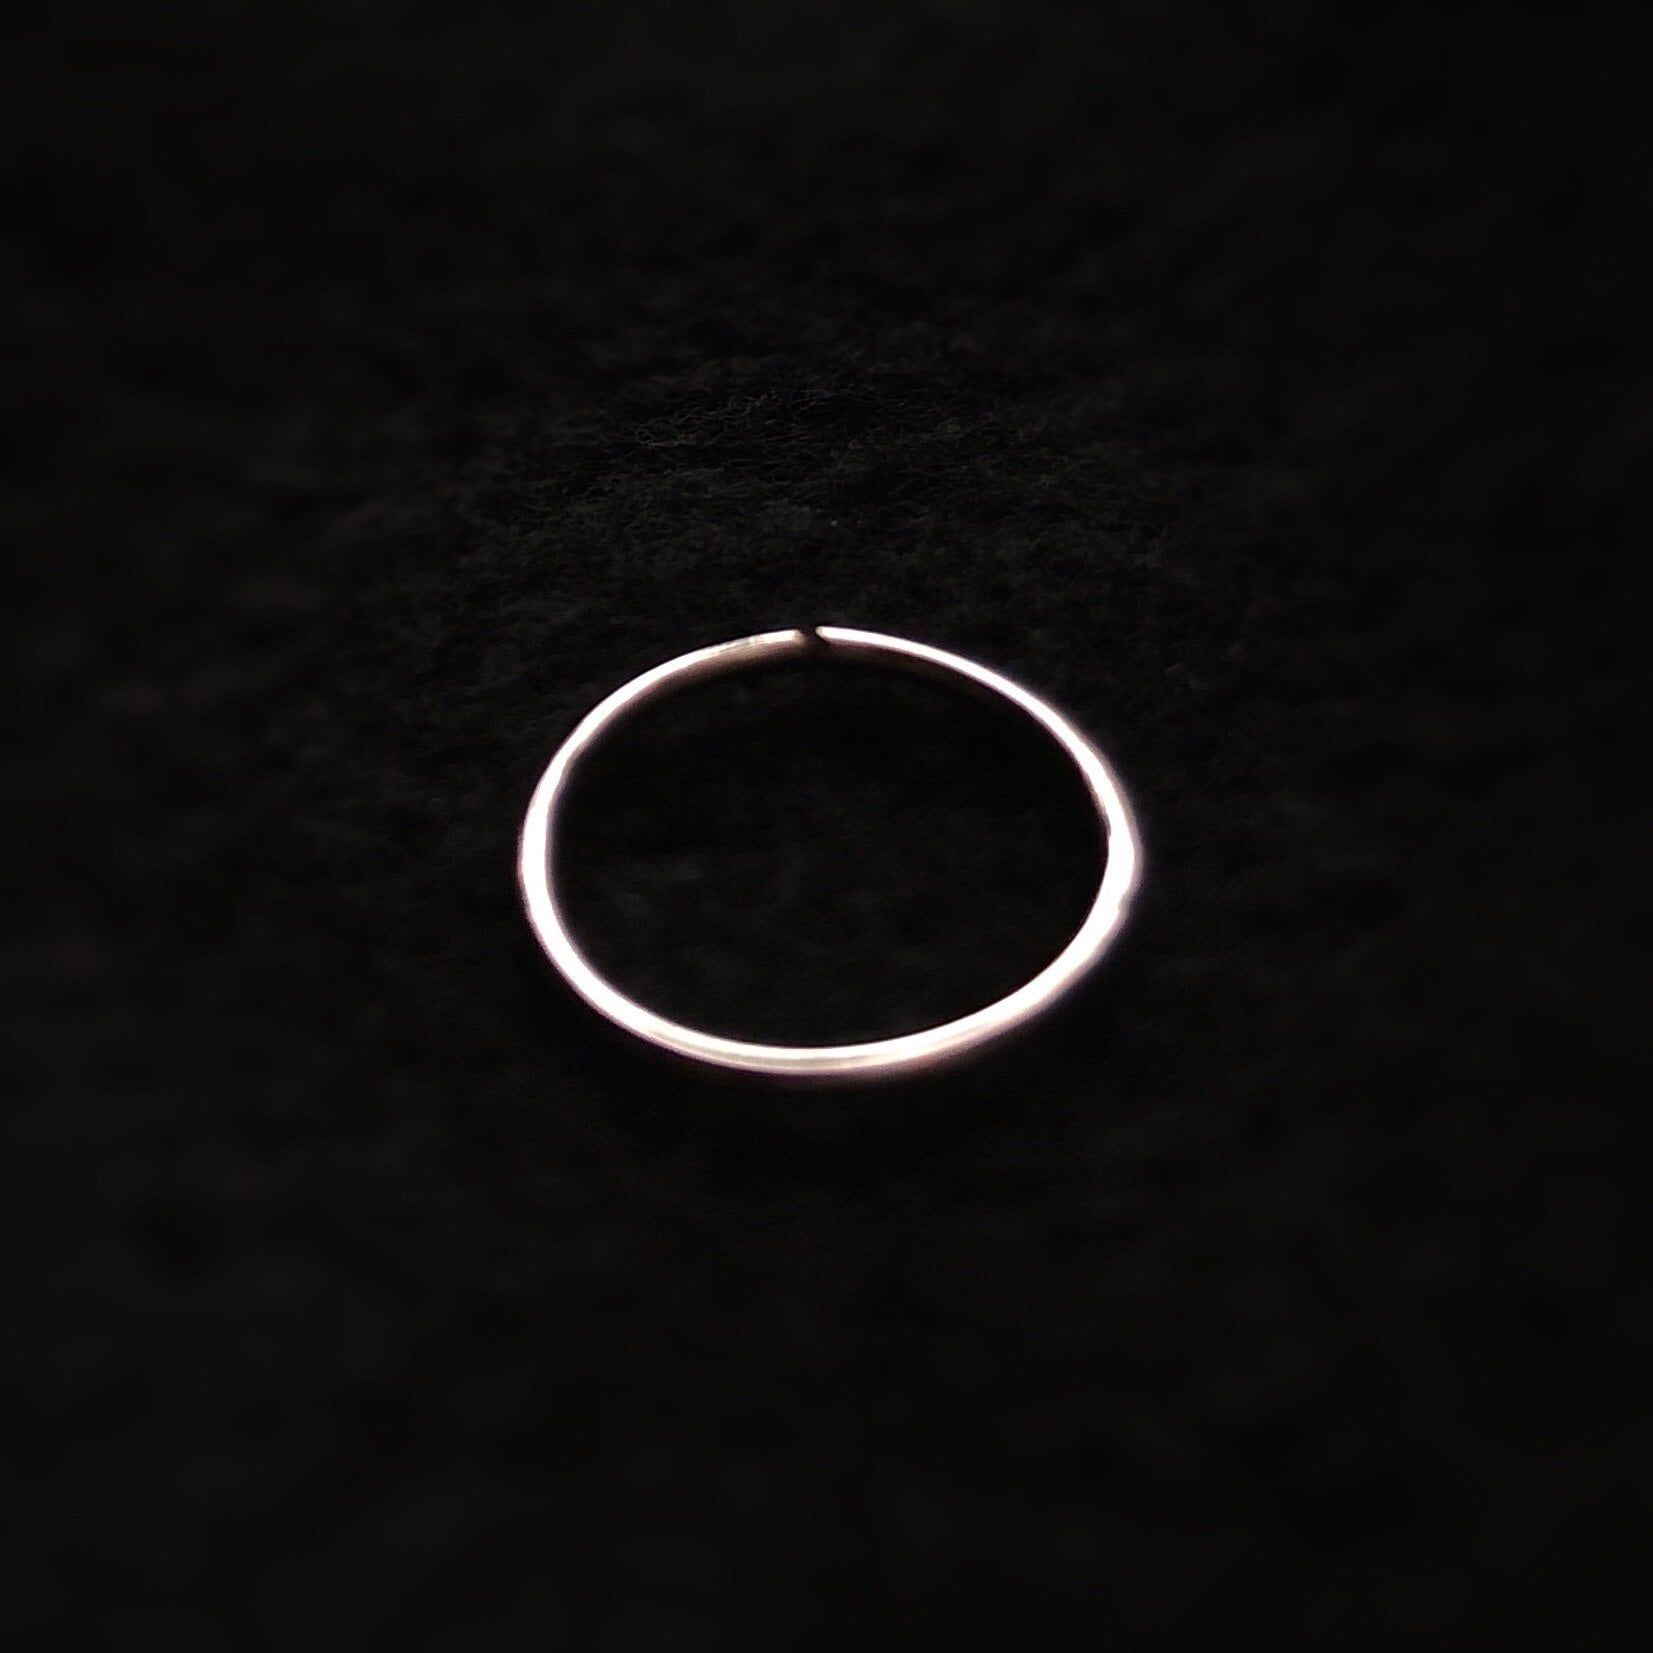 Fake clip on nose ring ultra thin cartilage hoop, No piercing needed